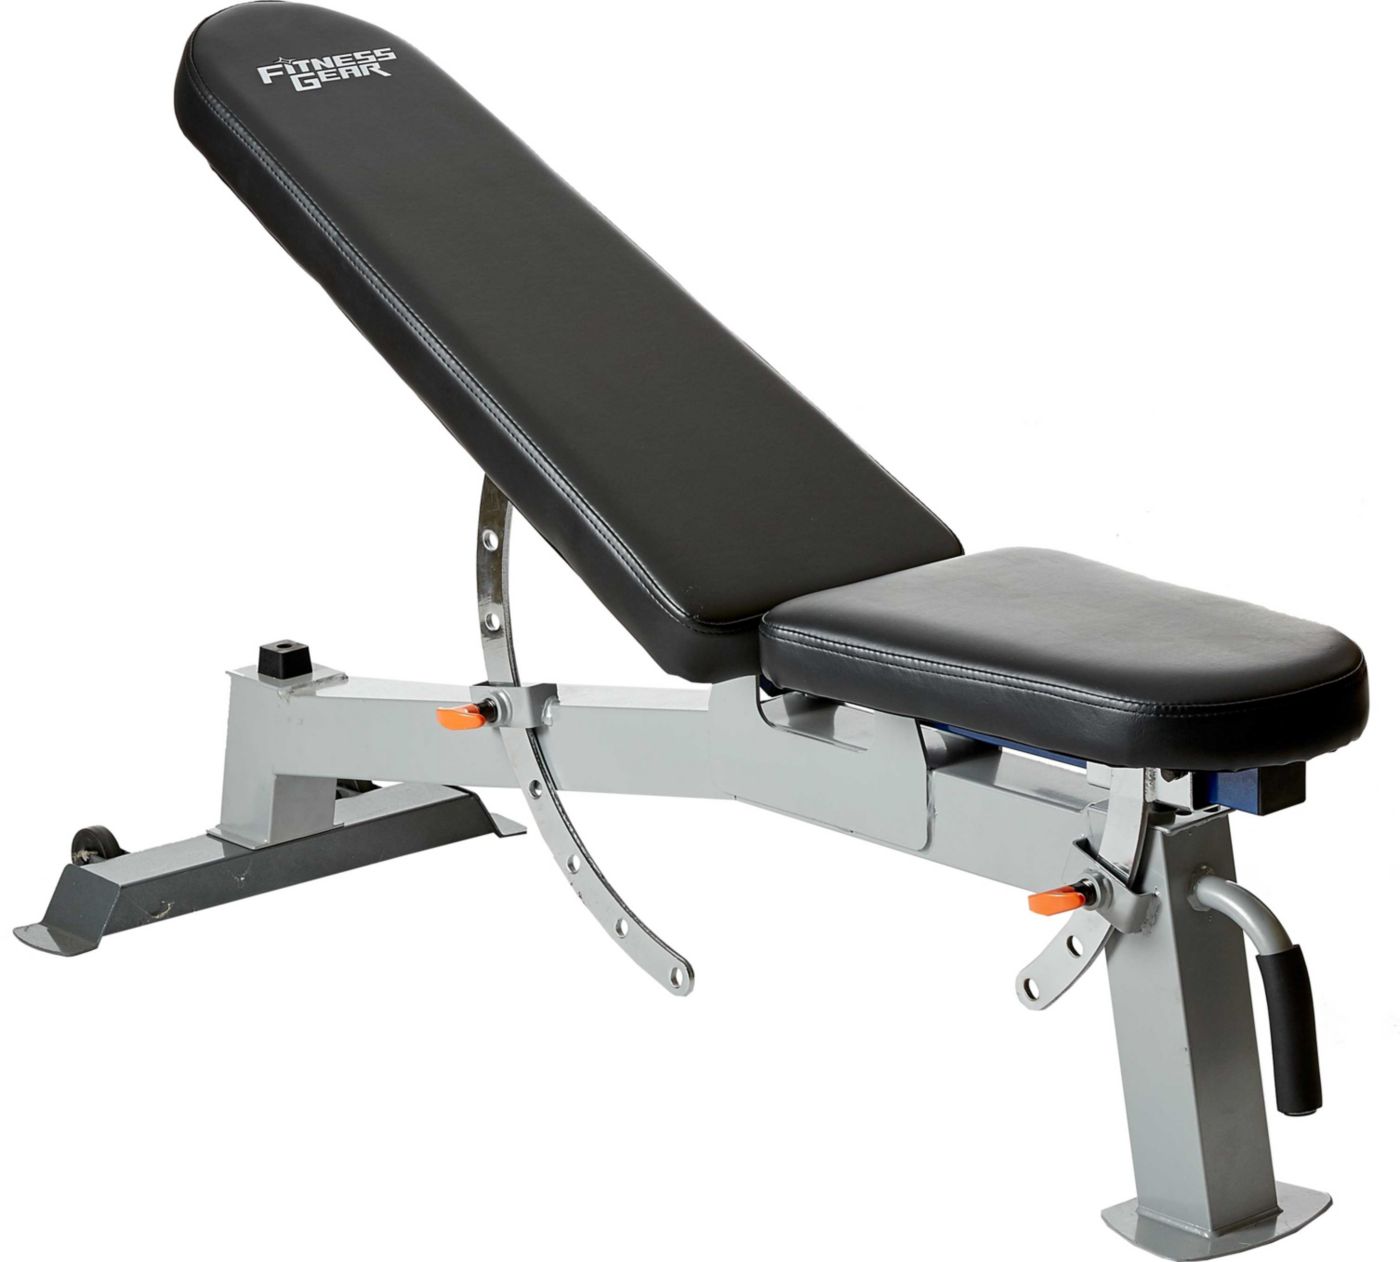 Fitness Gear Pro Utility Weight Bench